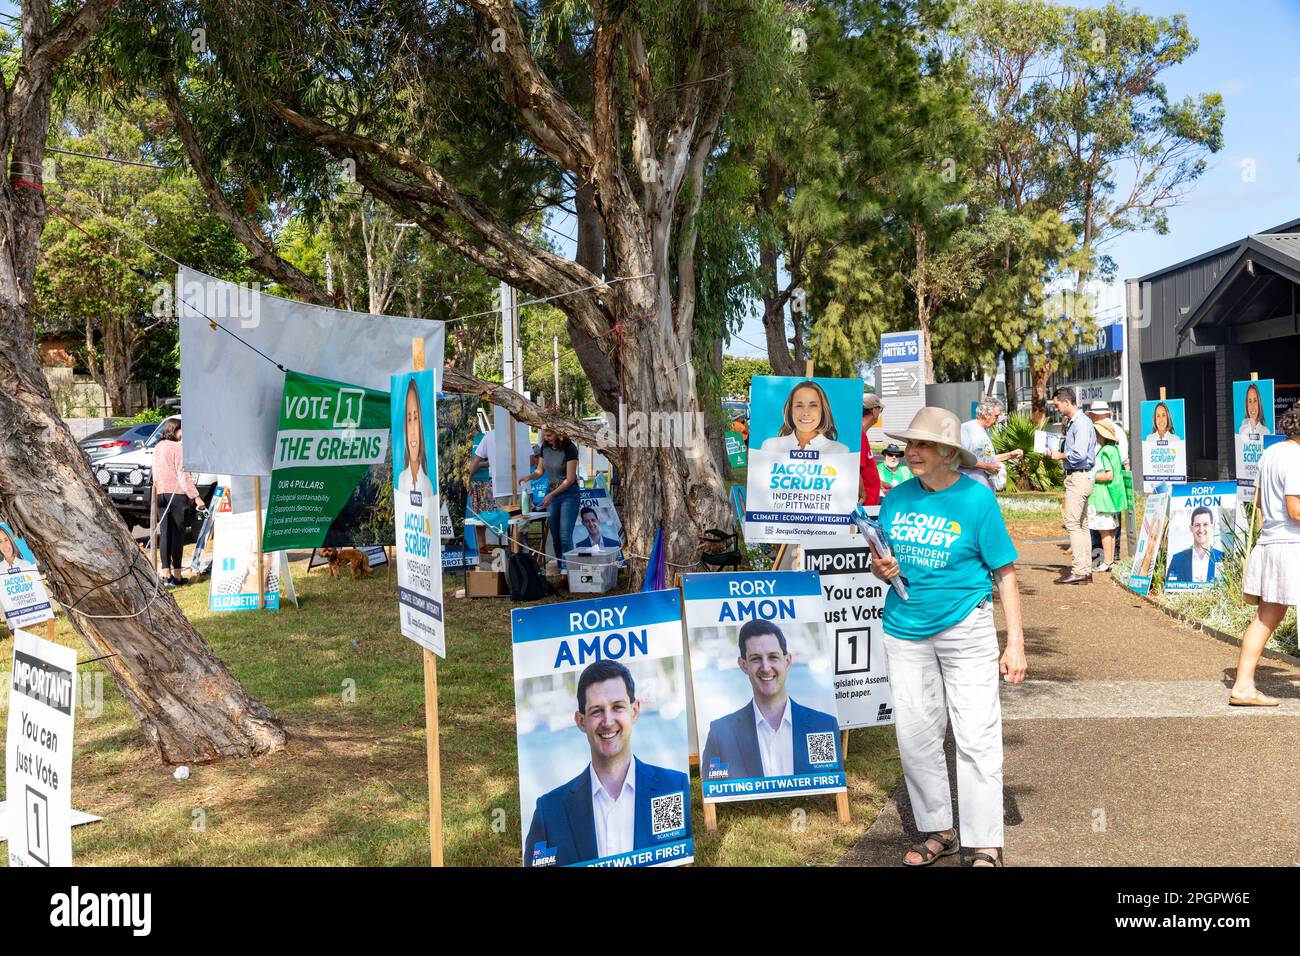 Friday 24th March 2023, Mona Vale polling booth in the seat of Pittwater open for early voting ahead of the NSW State Election 2023 on 25th March 2023, Pittwater is held by the Liberal Party but is expected to be closely contested between Rory Amon the Liberal candidate and Jacqui Scruby the teal independent, credit Martin Berry @ alamy live news. Stock Photo